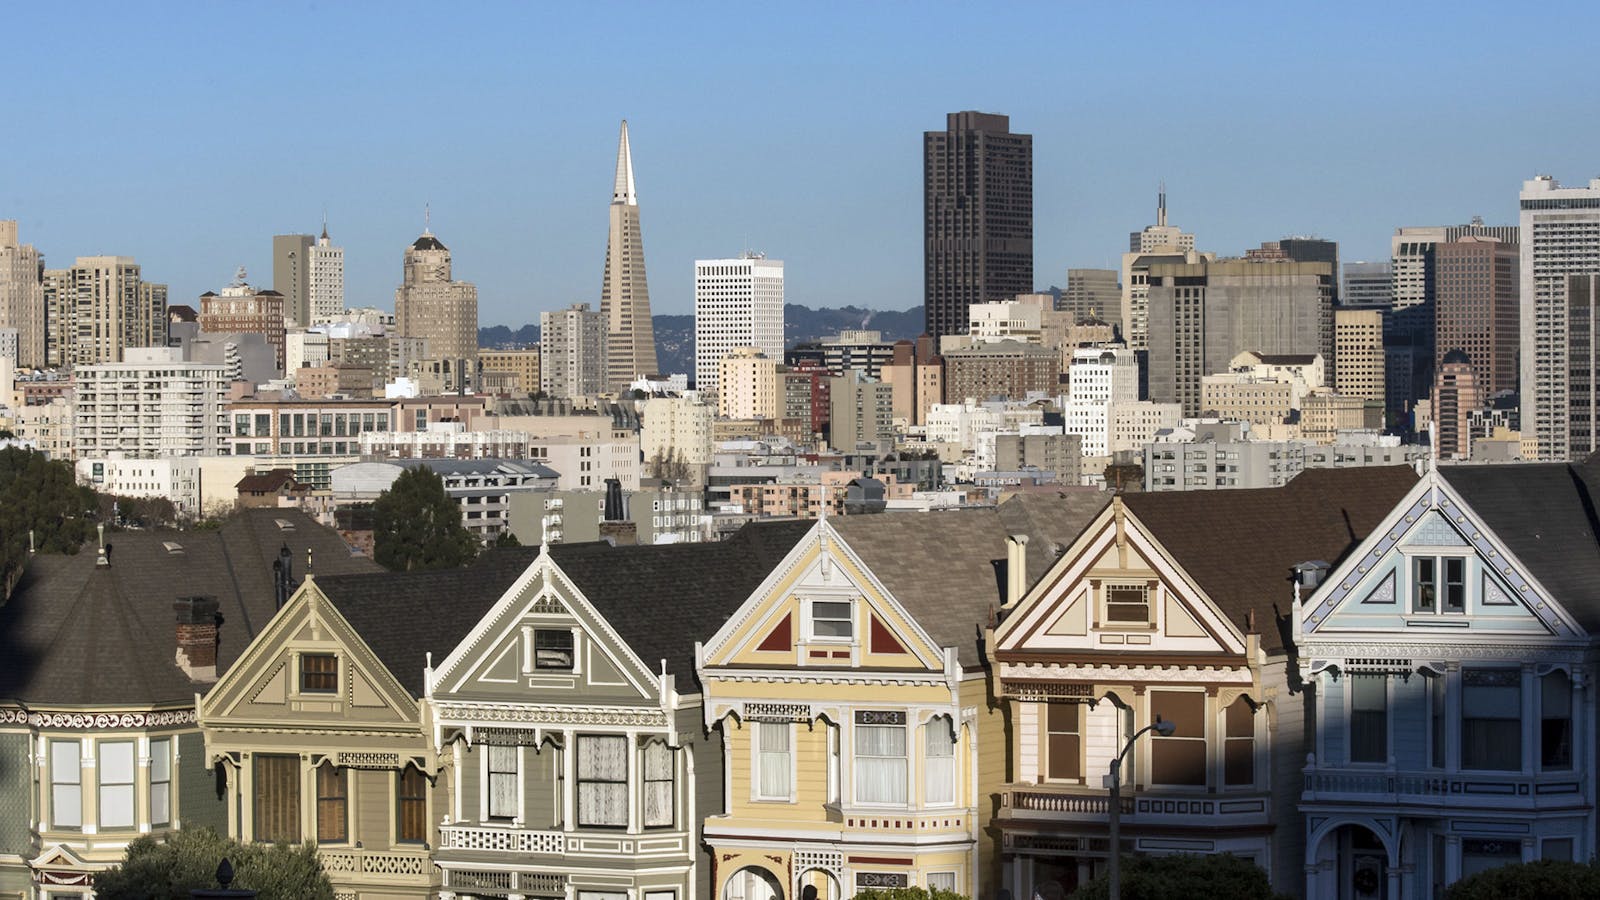 While San Francisco has long tested people’s budgets, the city has seen ‘unprecedented’ growth in housing prices recently. Photo: Bloomberg